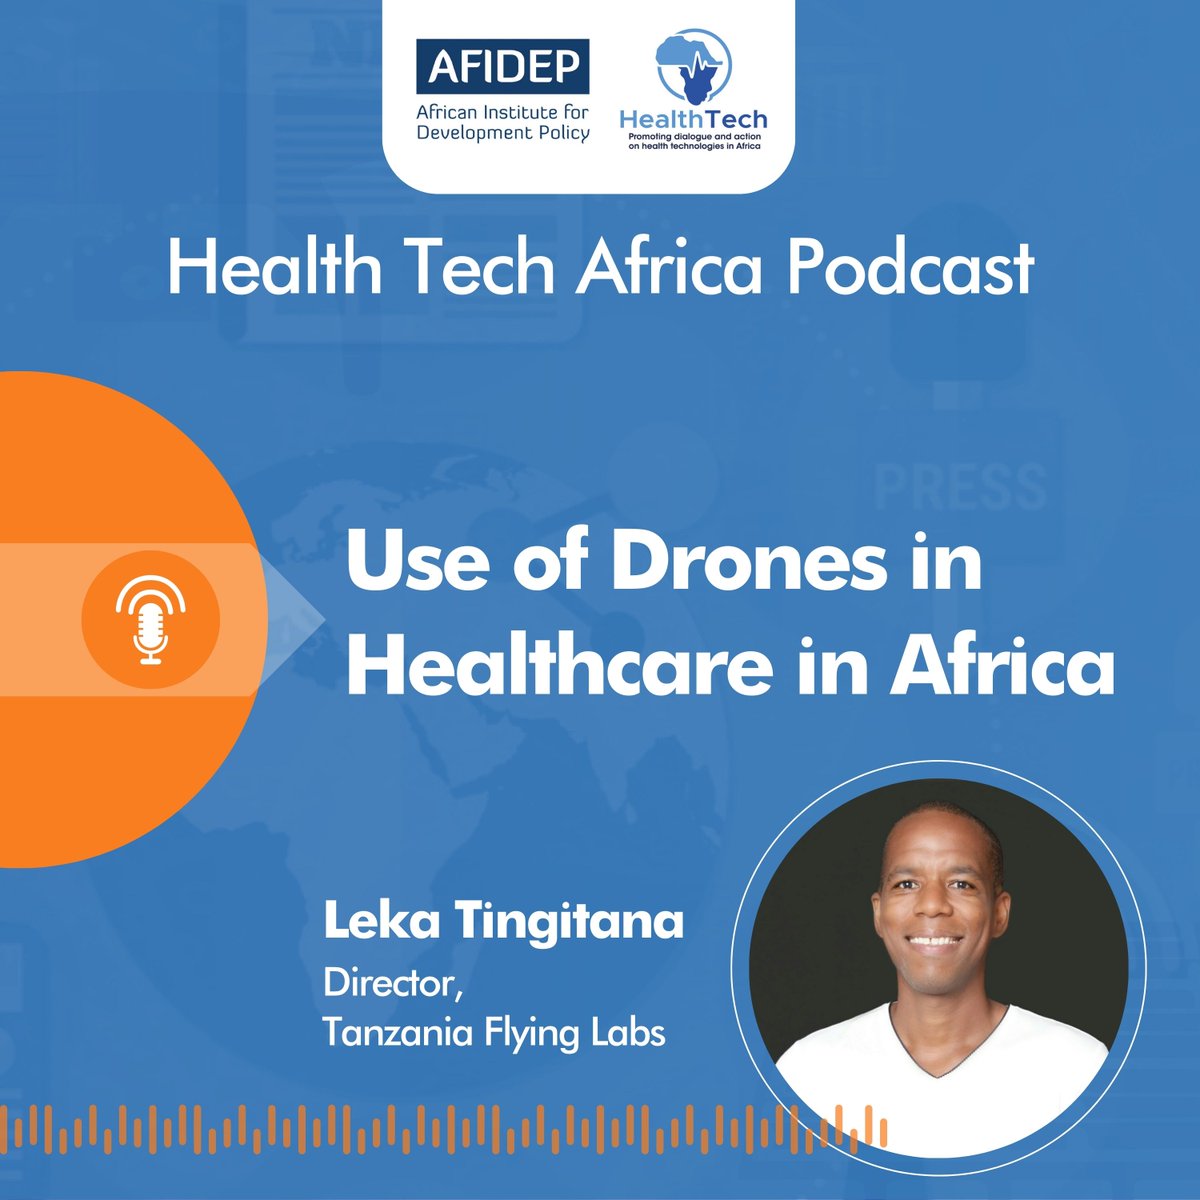 #NewPodcastAlert @lekaTZA, Director of @tzflyinglabs, shares insights on the use of drones in healthcare in Africa, noting that drones enable us to embrace data more efficient, more effective decision-making in the sector. Listen here bit.ly/45PrGxj